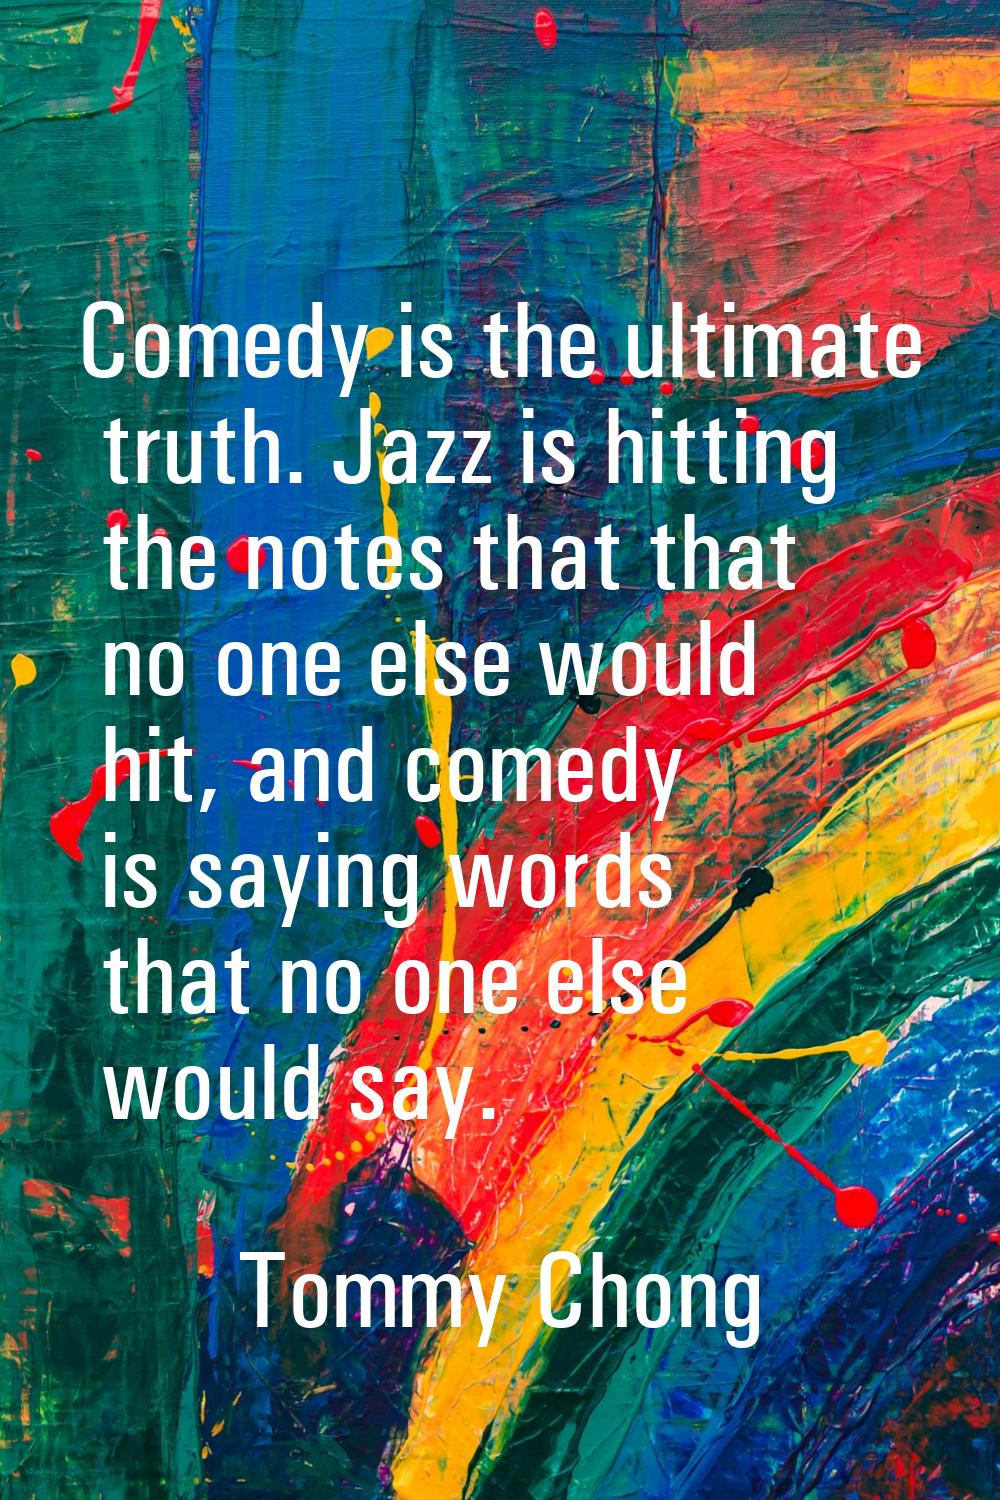 Comedy is the ultimate truth. Jazz is hitting the notes that that no one else would hit, and comedy